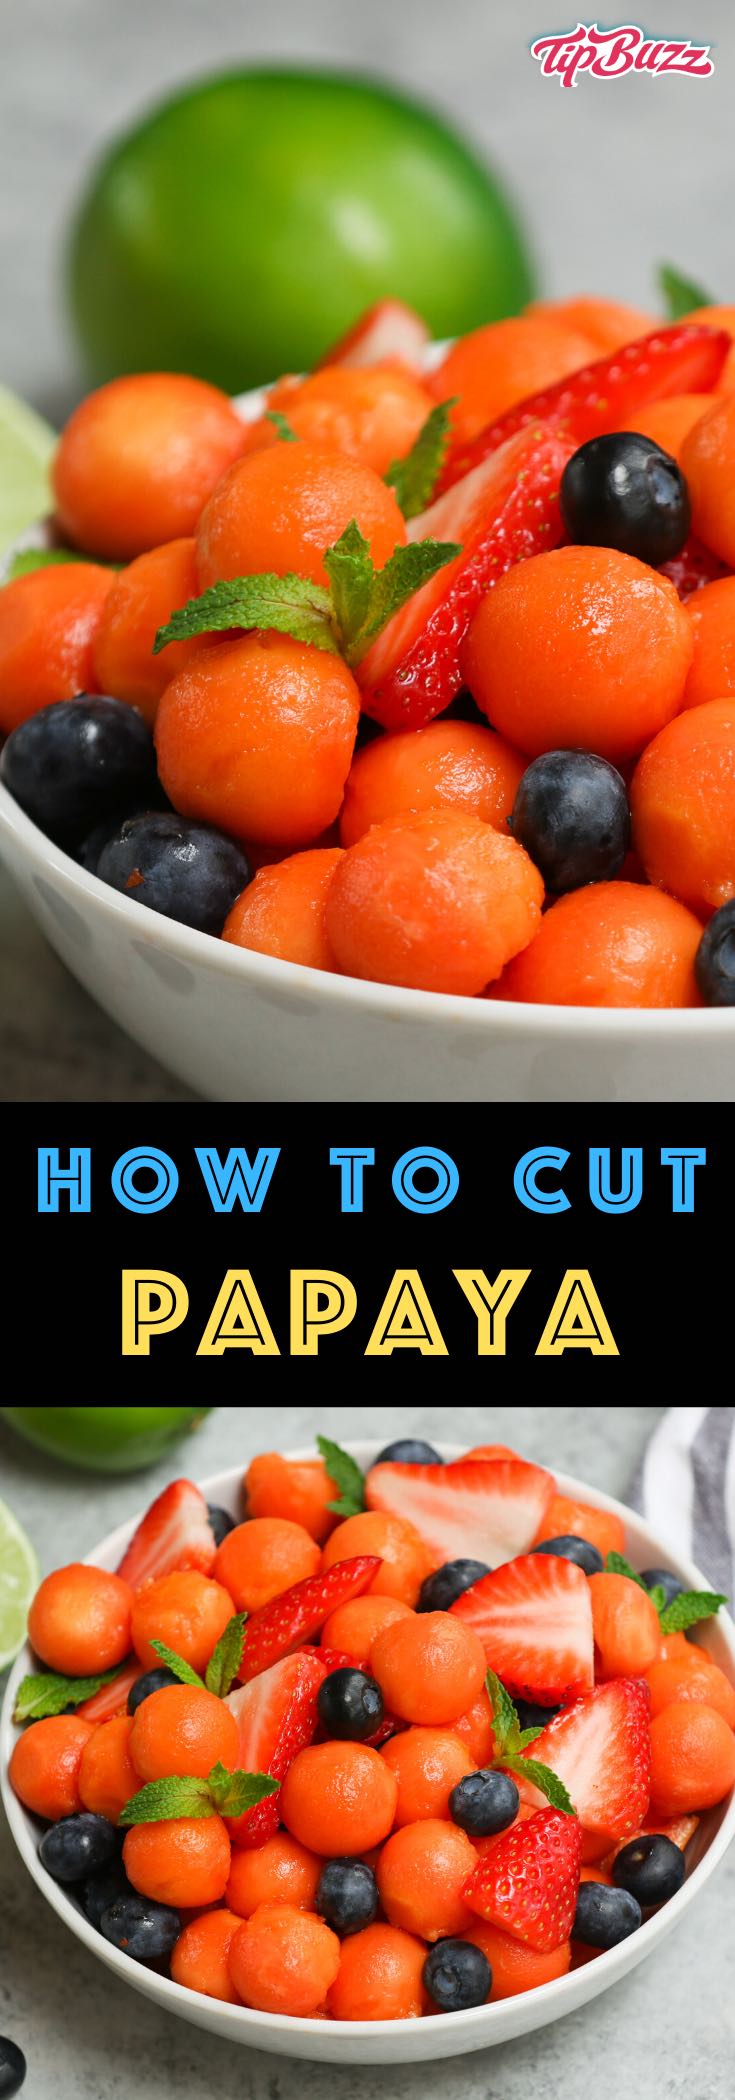 Learn how to cut and eat papaya so you can enjoy this nutritious tropical fruit! It's packed with health benefits and is a great snack or addition to fruit salads, smoothies, desserts and more.